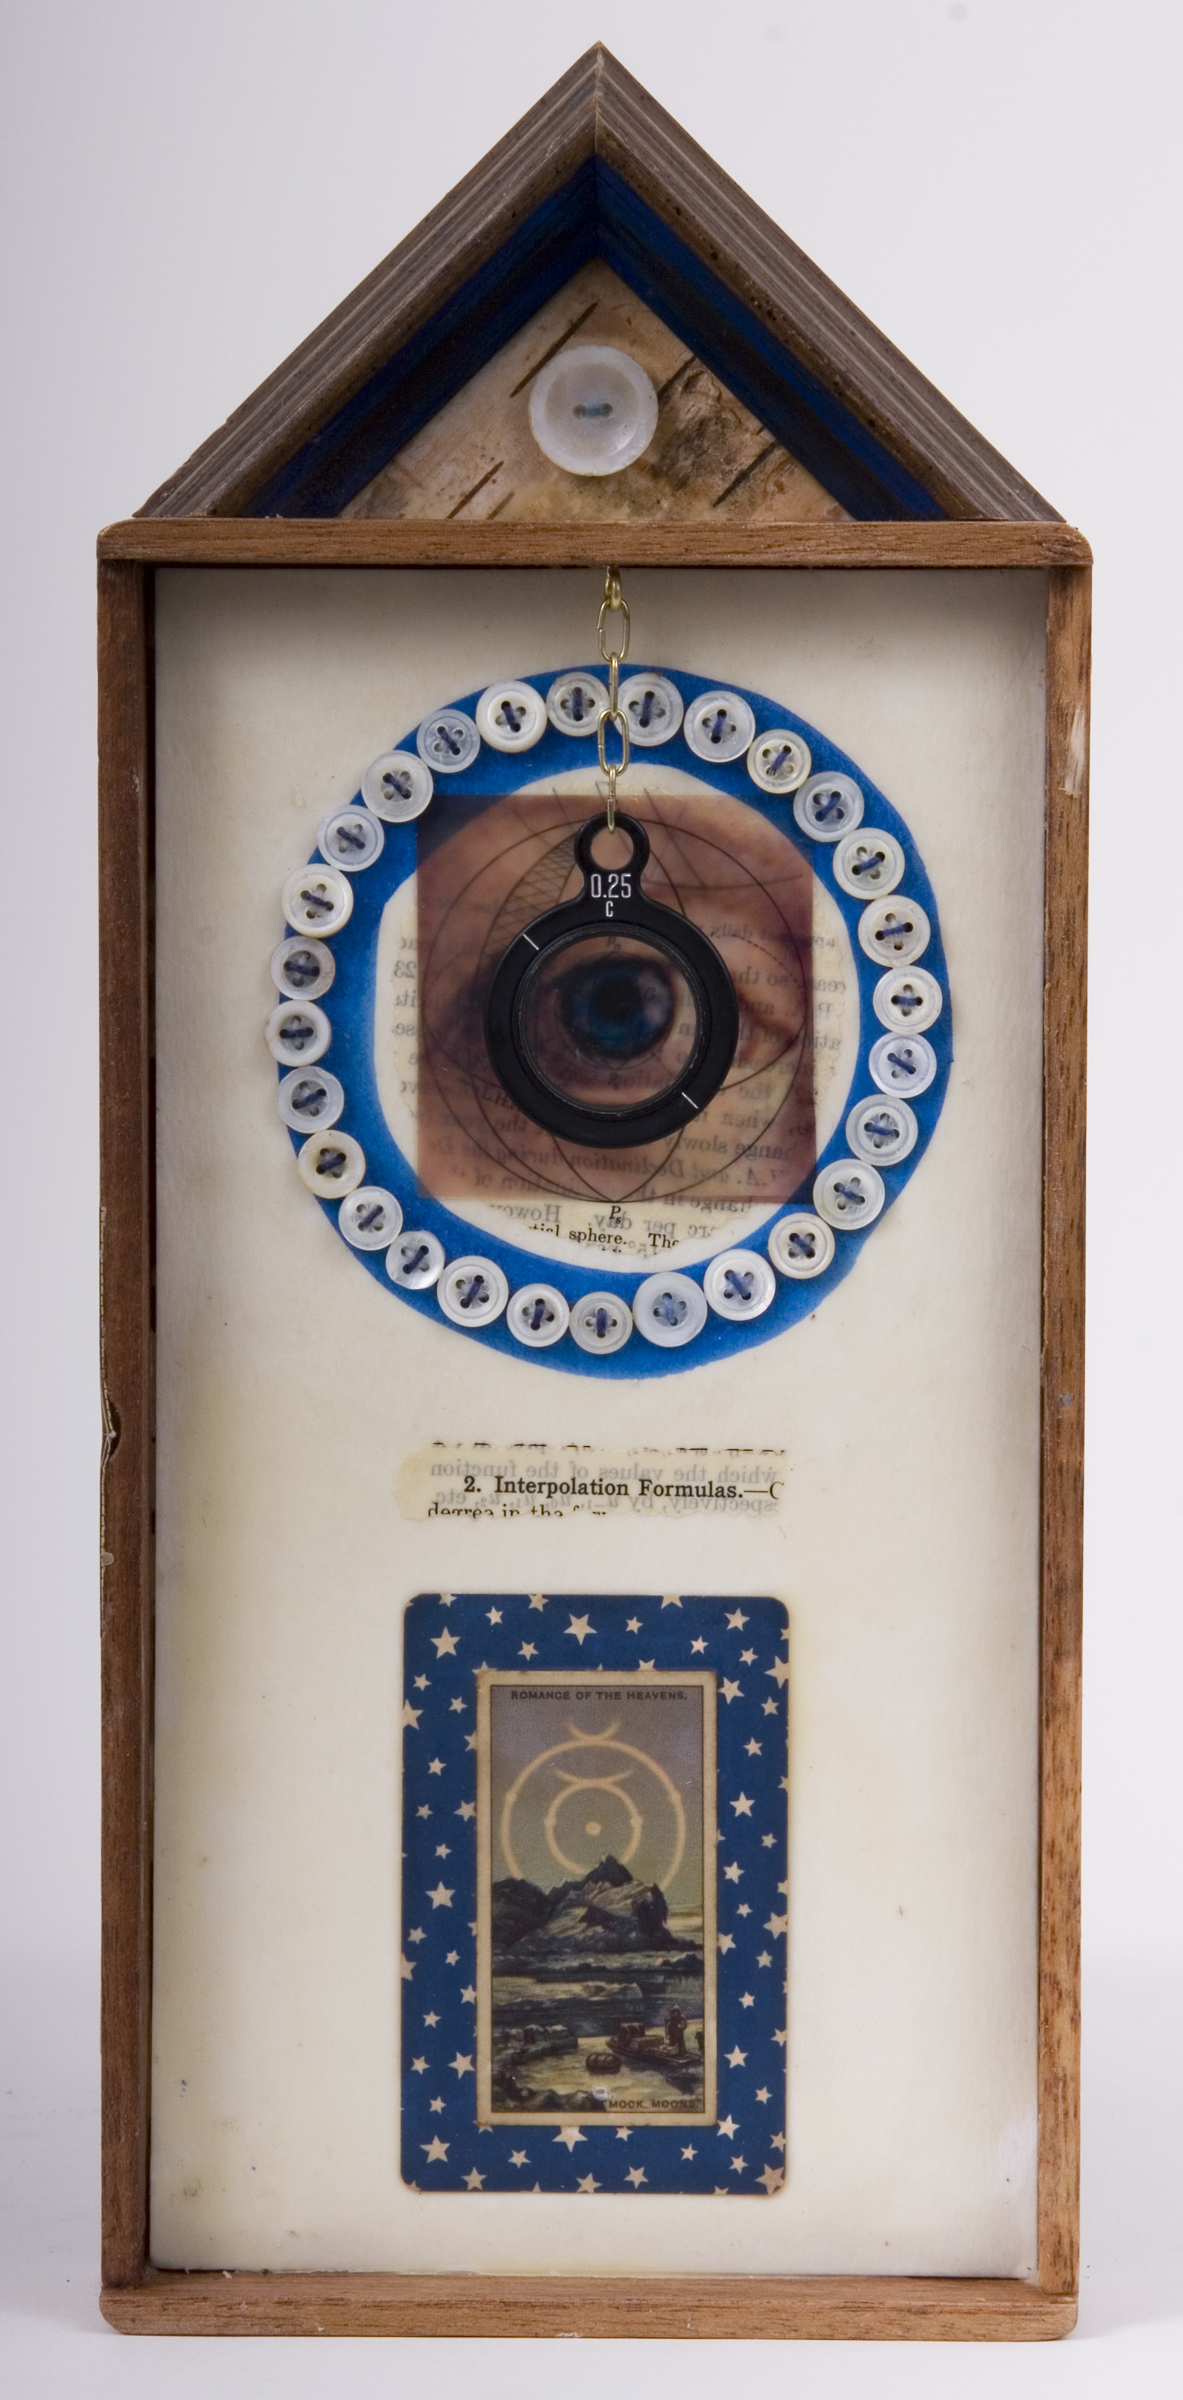      \"2. Interpolation Formulas\"
    mixed-media assemblage
    13 x 5.75 x 1.75
    2009
    SOLD

    Cigar box, frame sample, birch bark, mother of pearl buttons, fortune & tobac cards, transparency, optical lens, ink, wax, astronomy text on watercolor paper